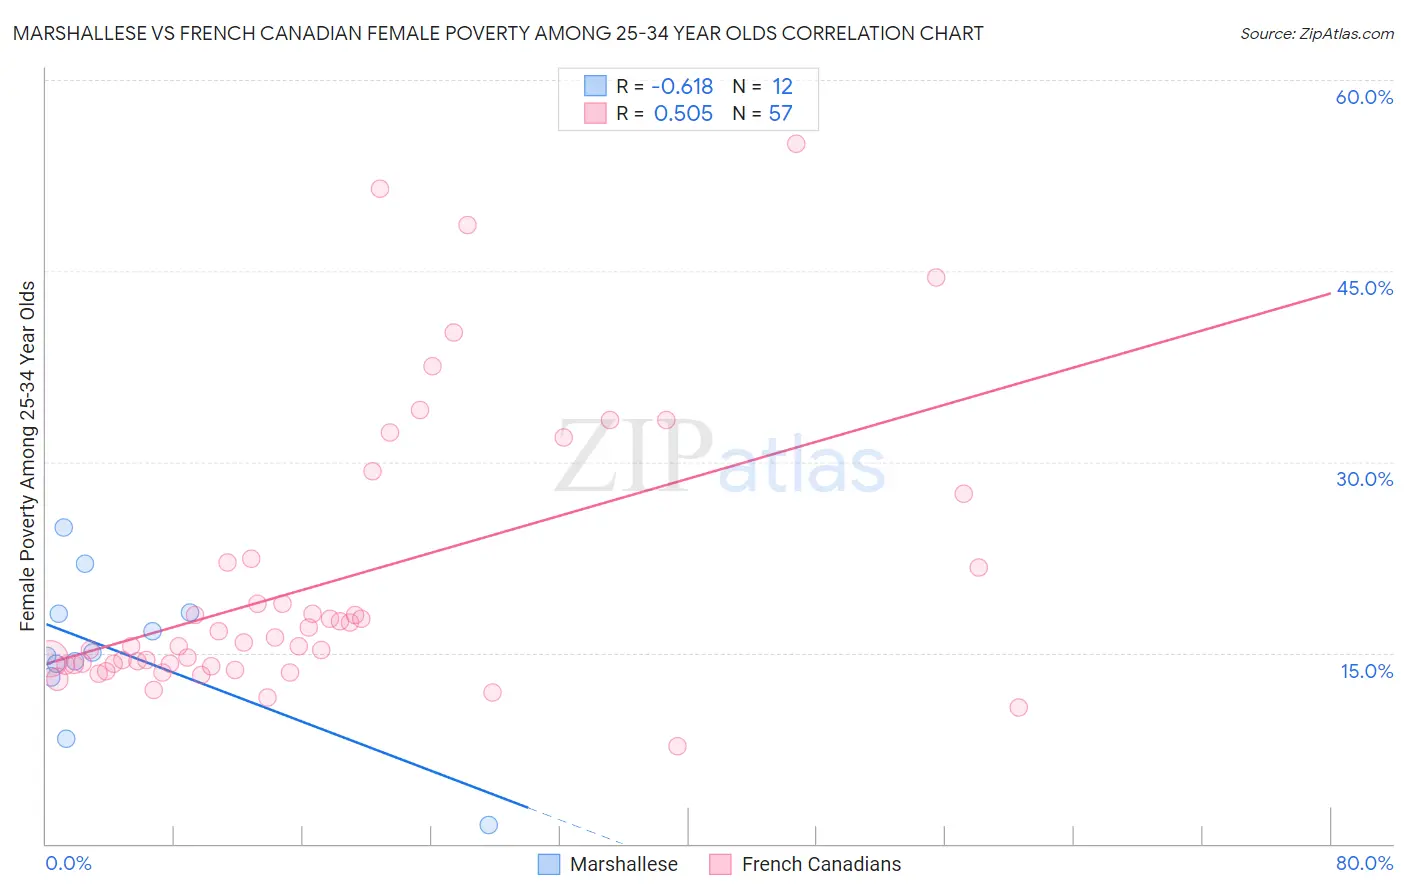 Marshallese vs French Canadian Female Poverty Among 25-34 Year Olds